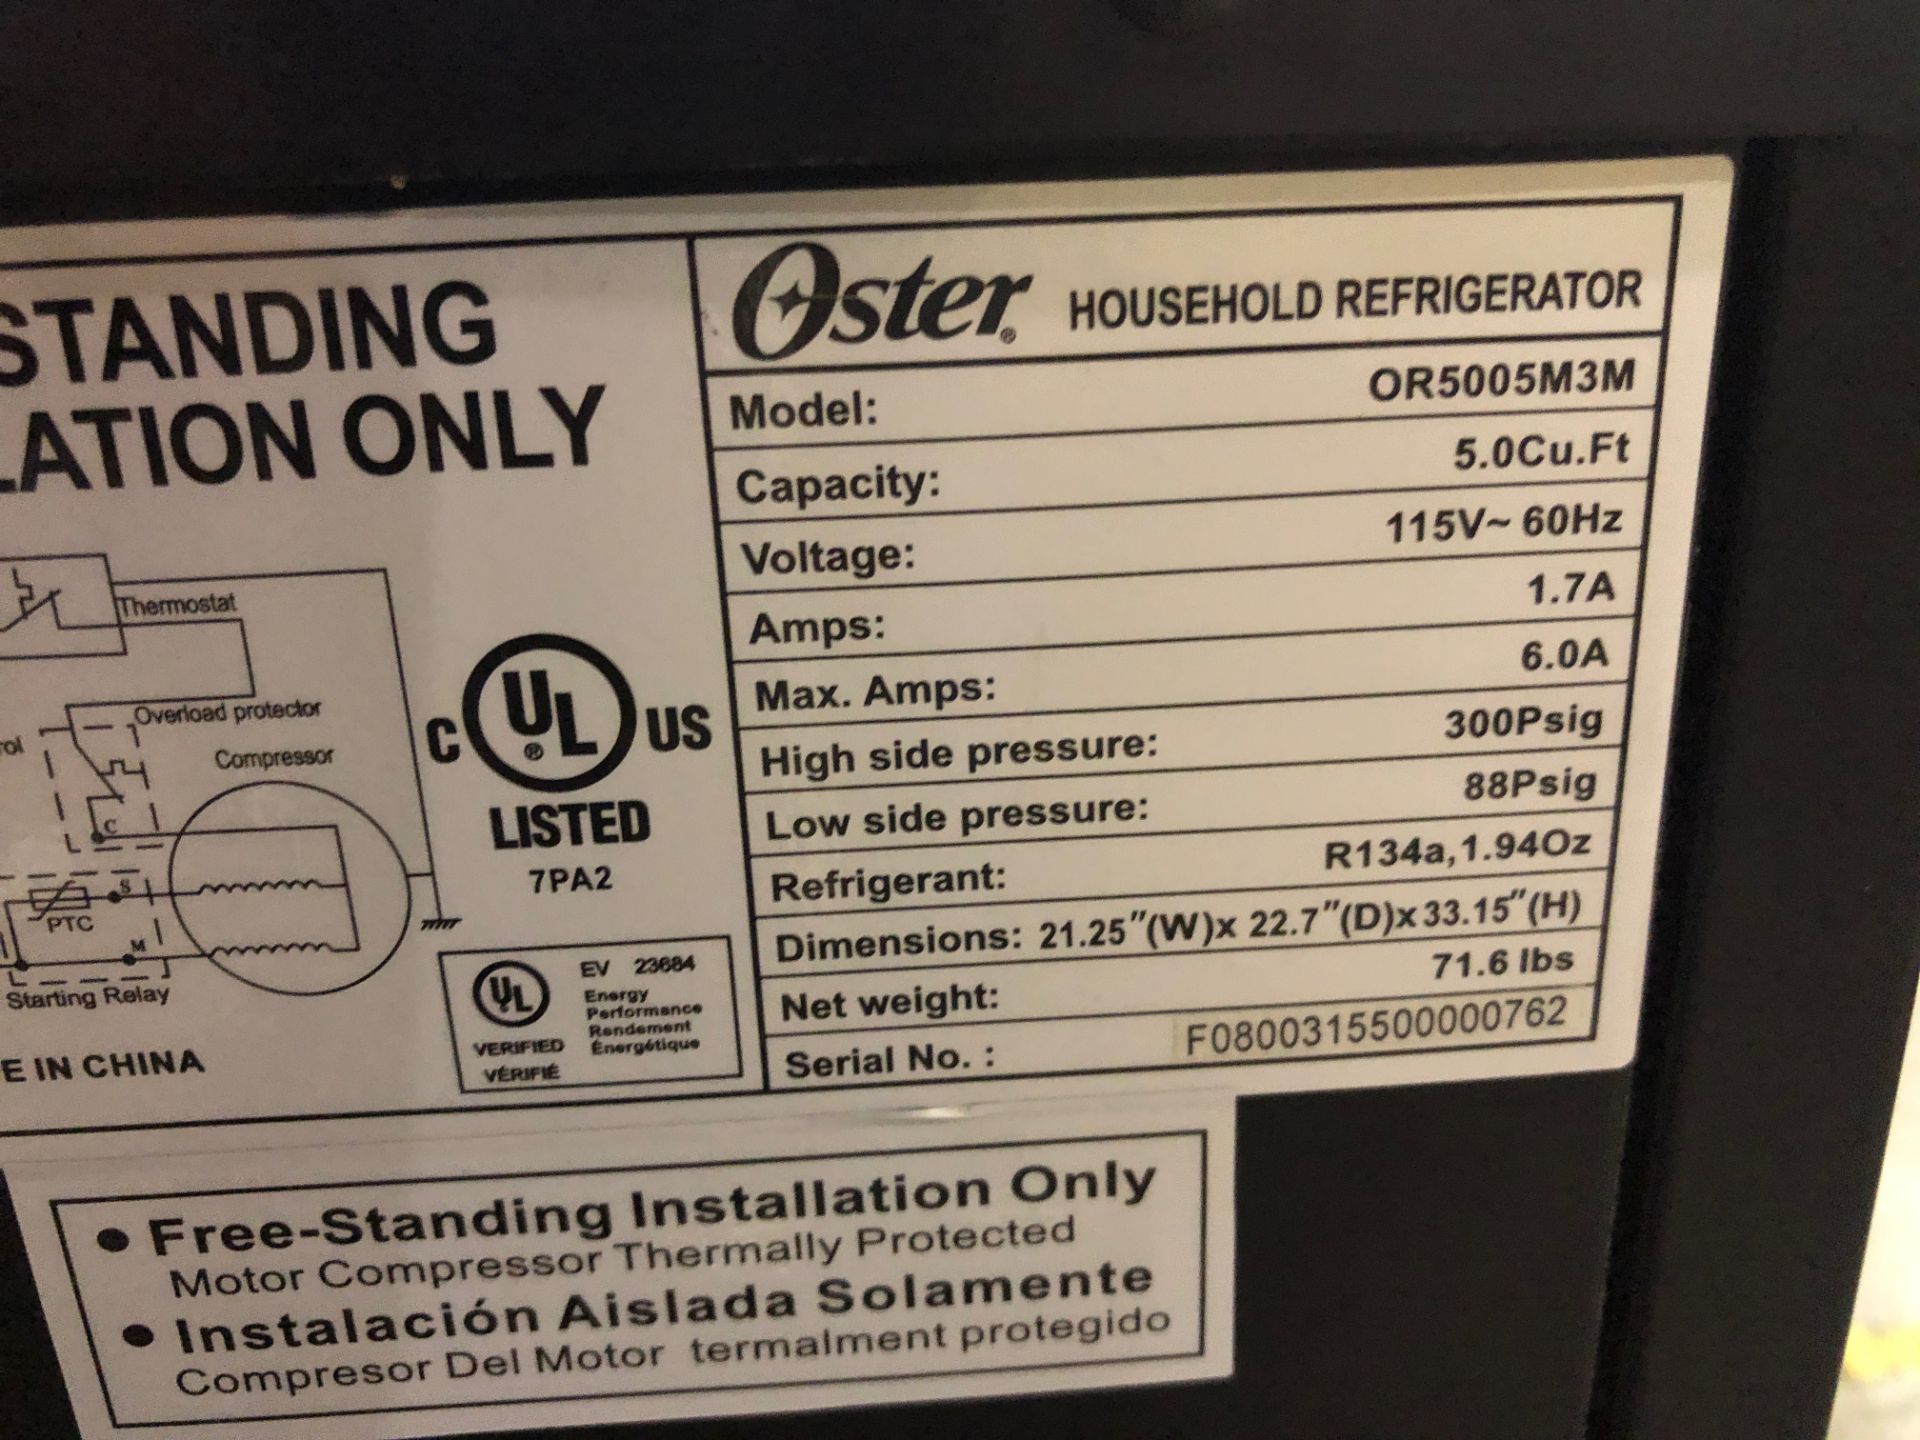 Oster Household Refrigerator Under Counter 5CU FT Capacity, RIGGING FEE $25 - Image 3 of 3